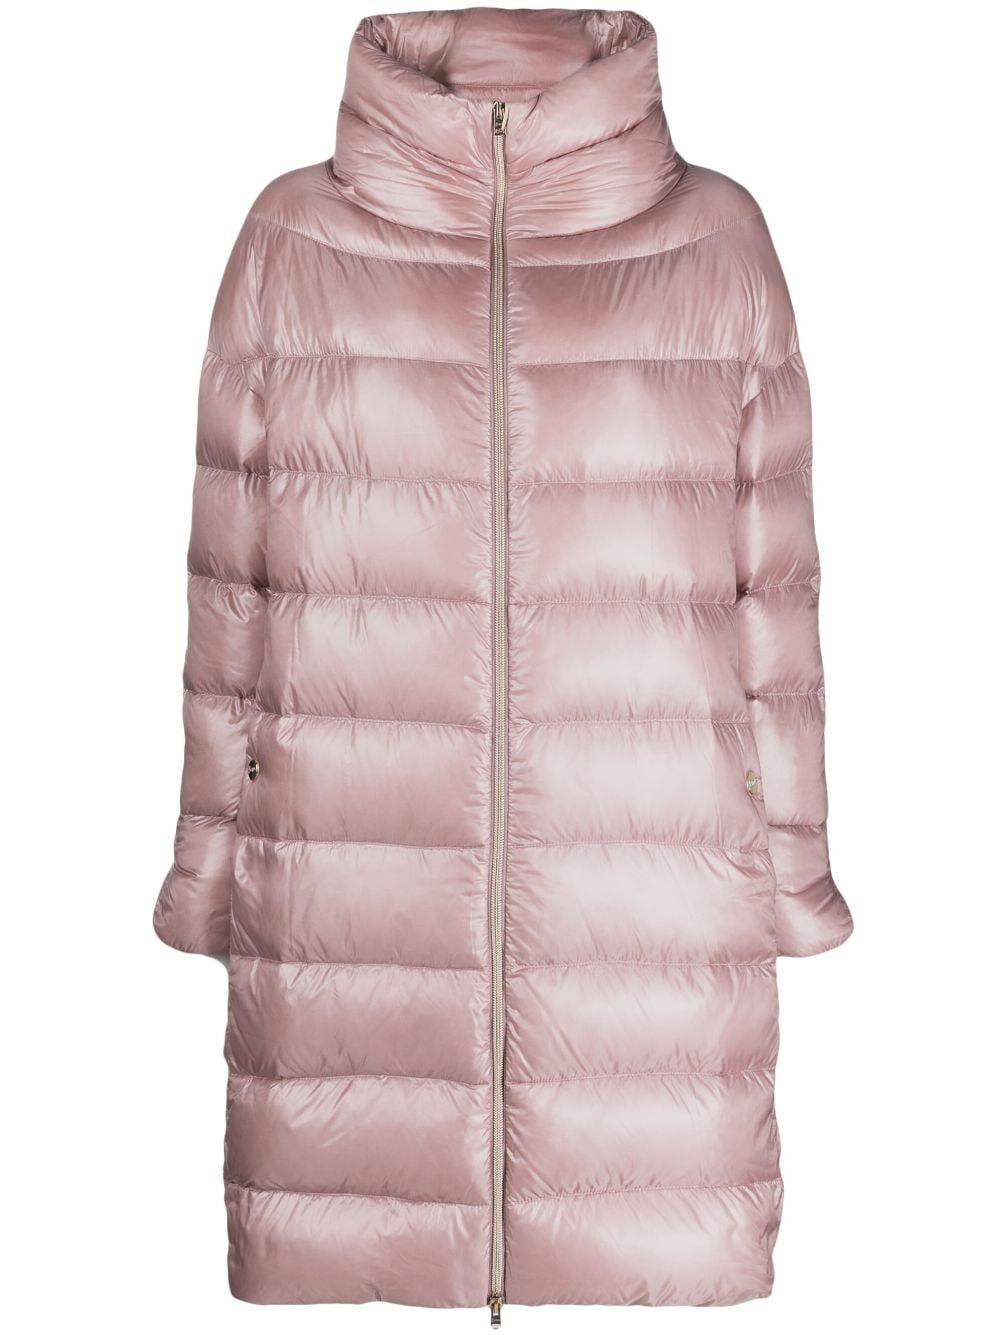 Herno Matilde Down Puffer Coat in Pink | Lyst